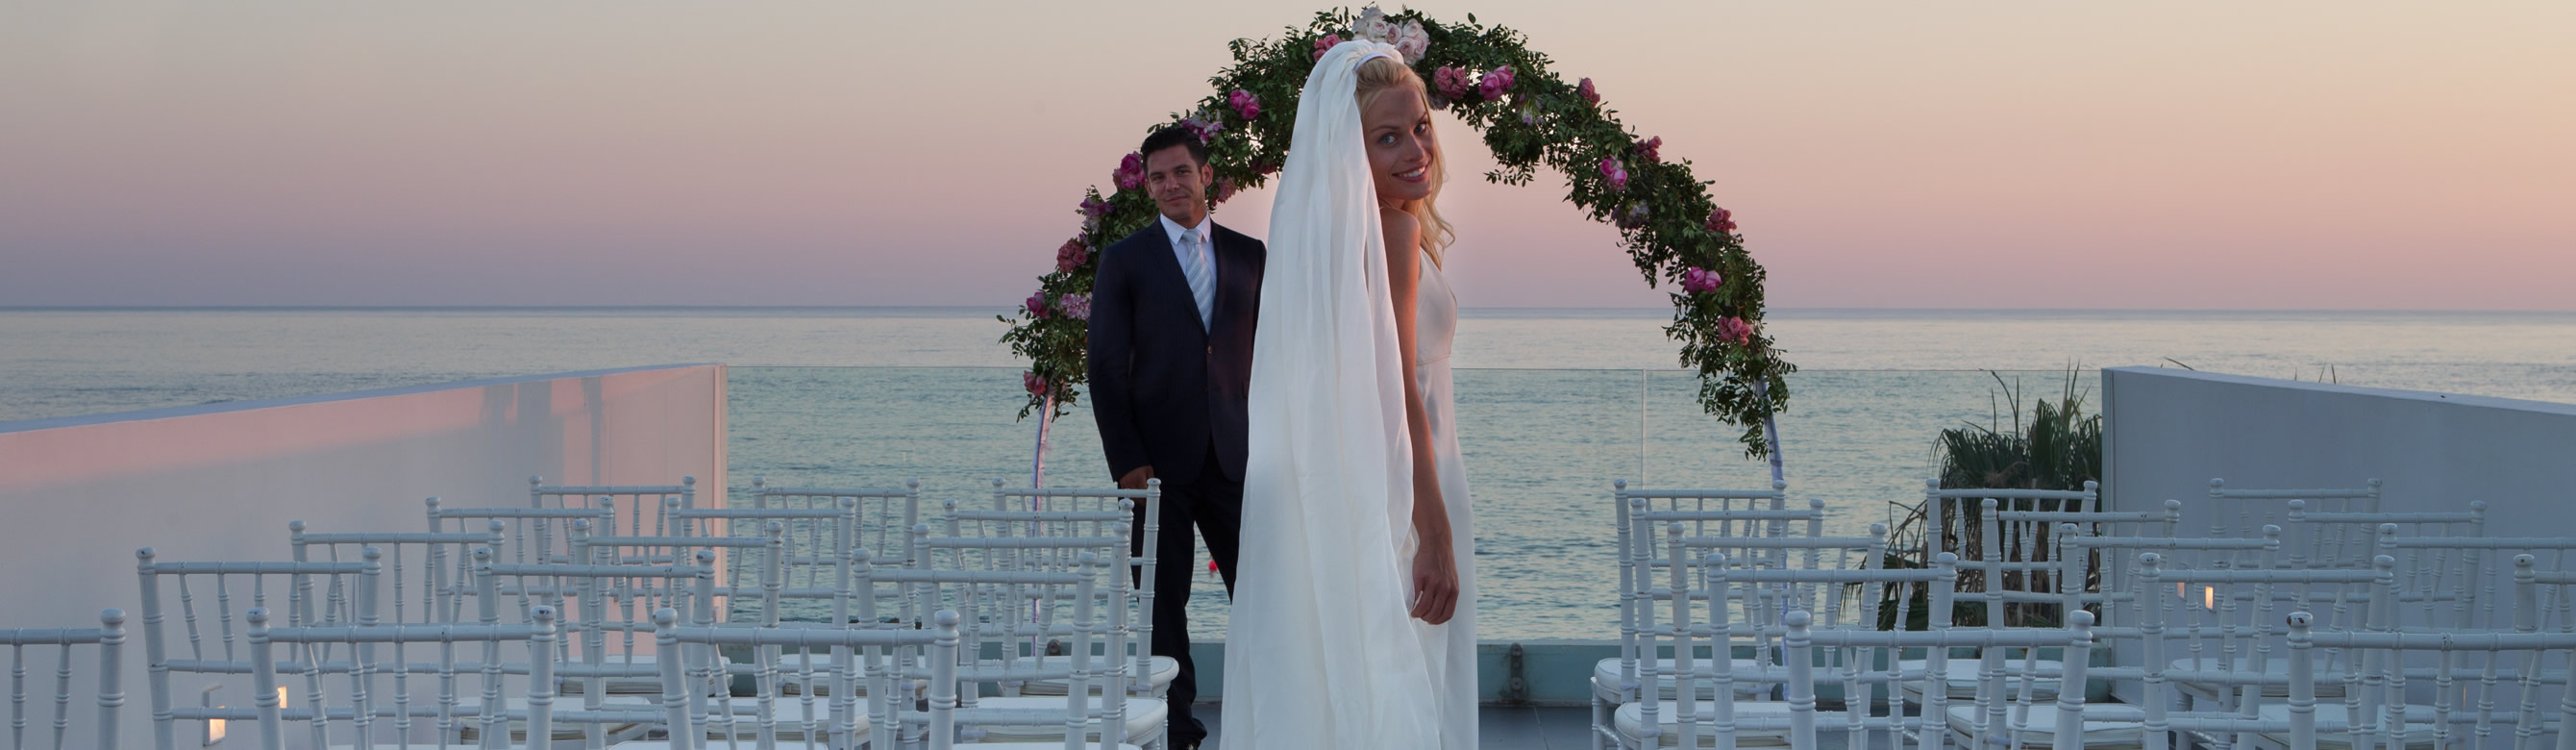 Book your wedding day in Almyra Hotel Paphos